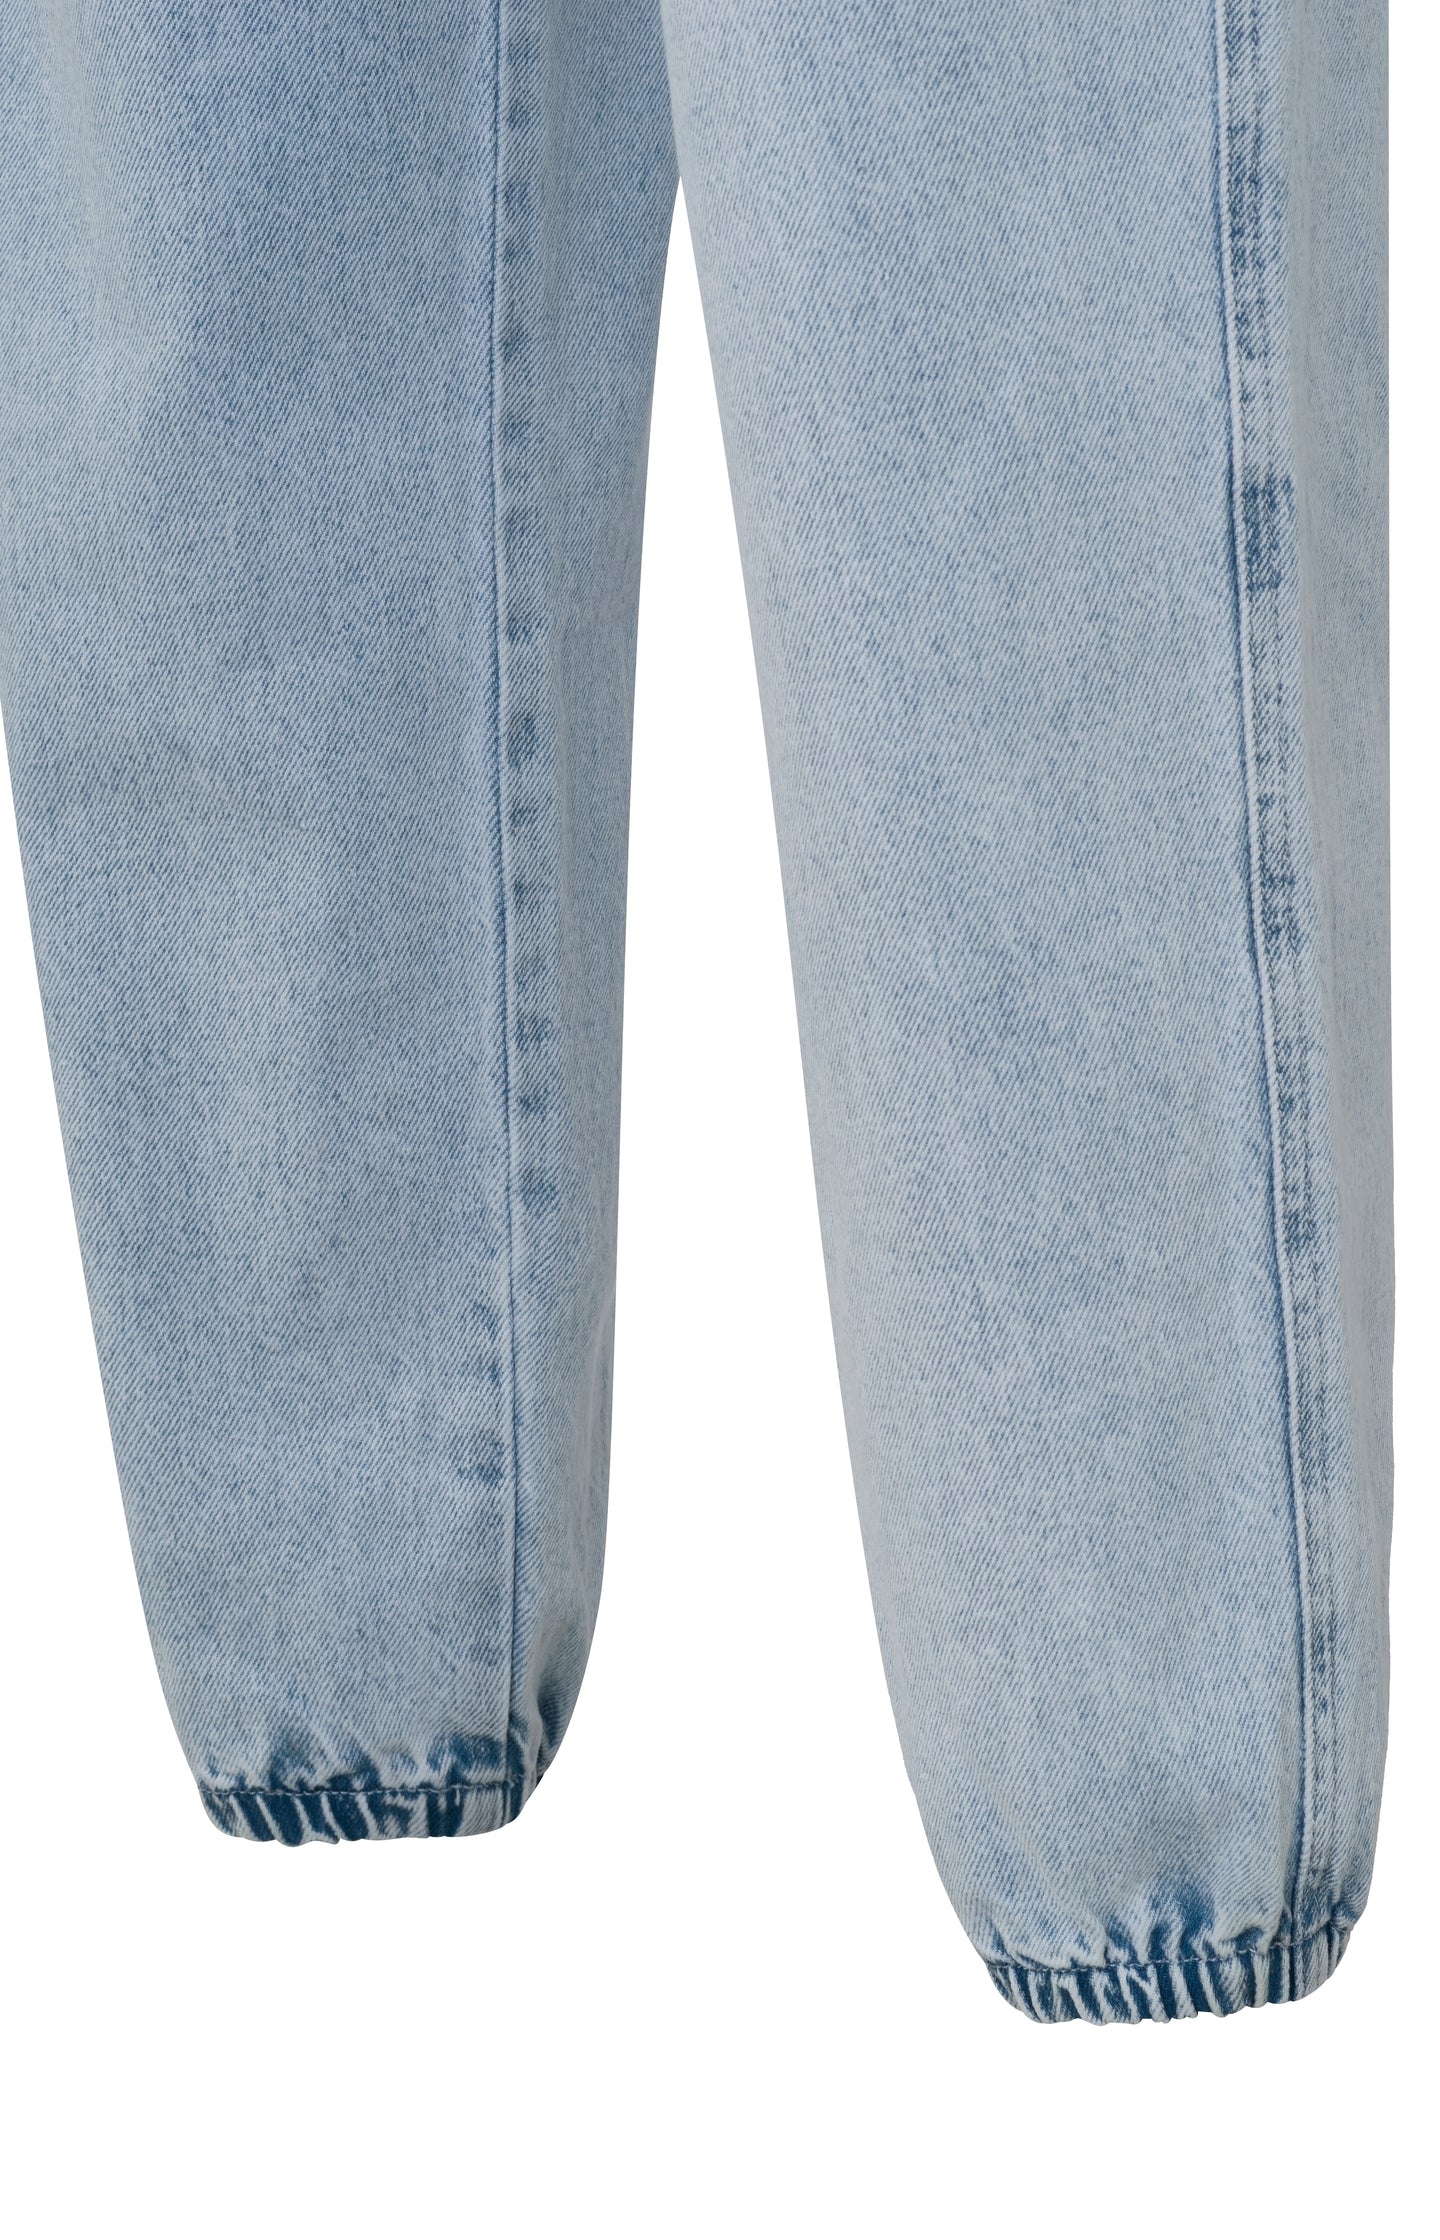 High waist denim with side pockets, zip fly and seam details